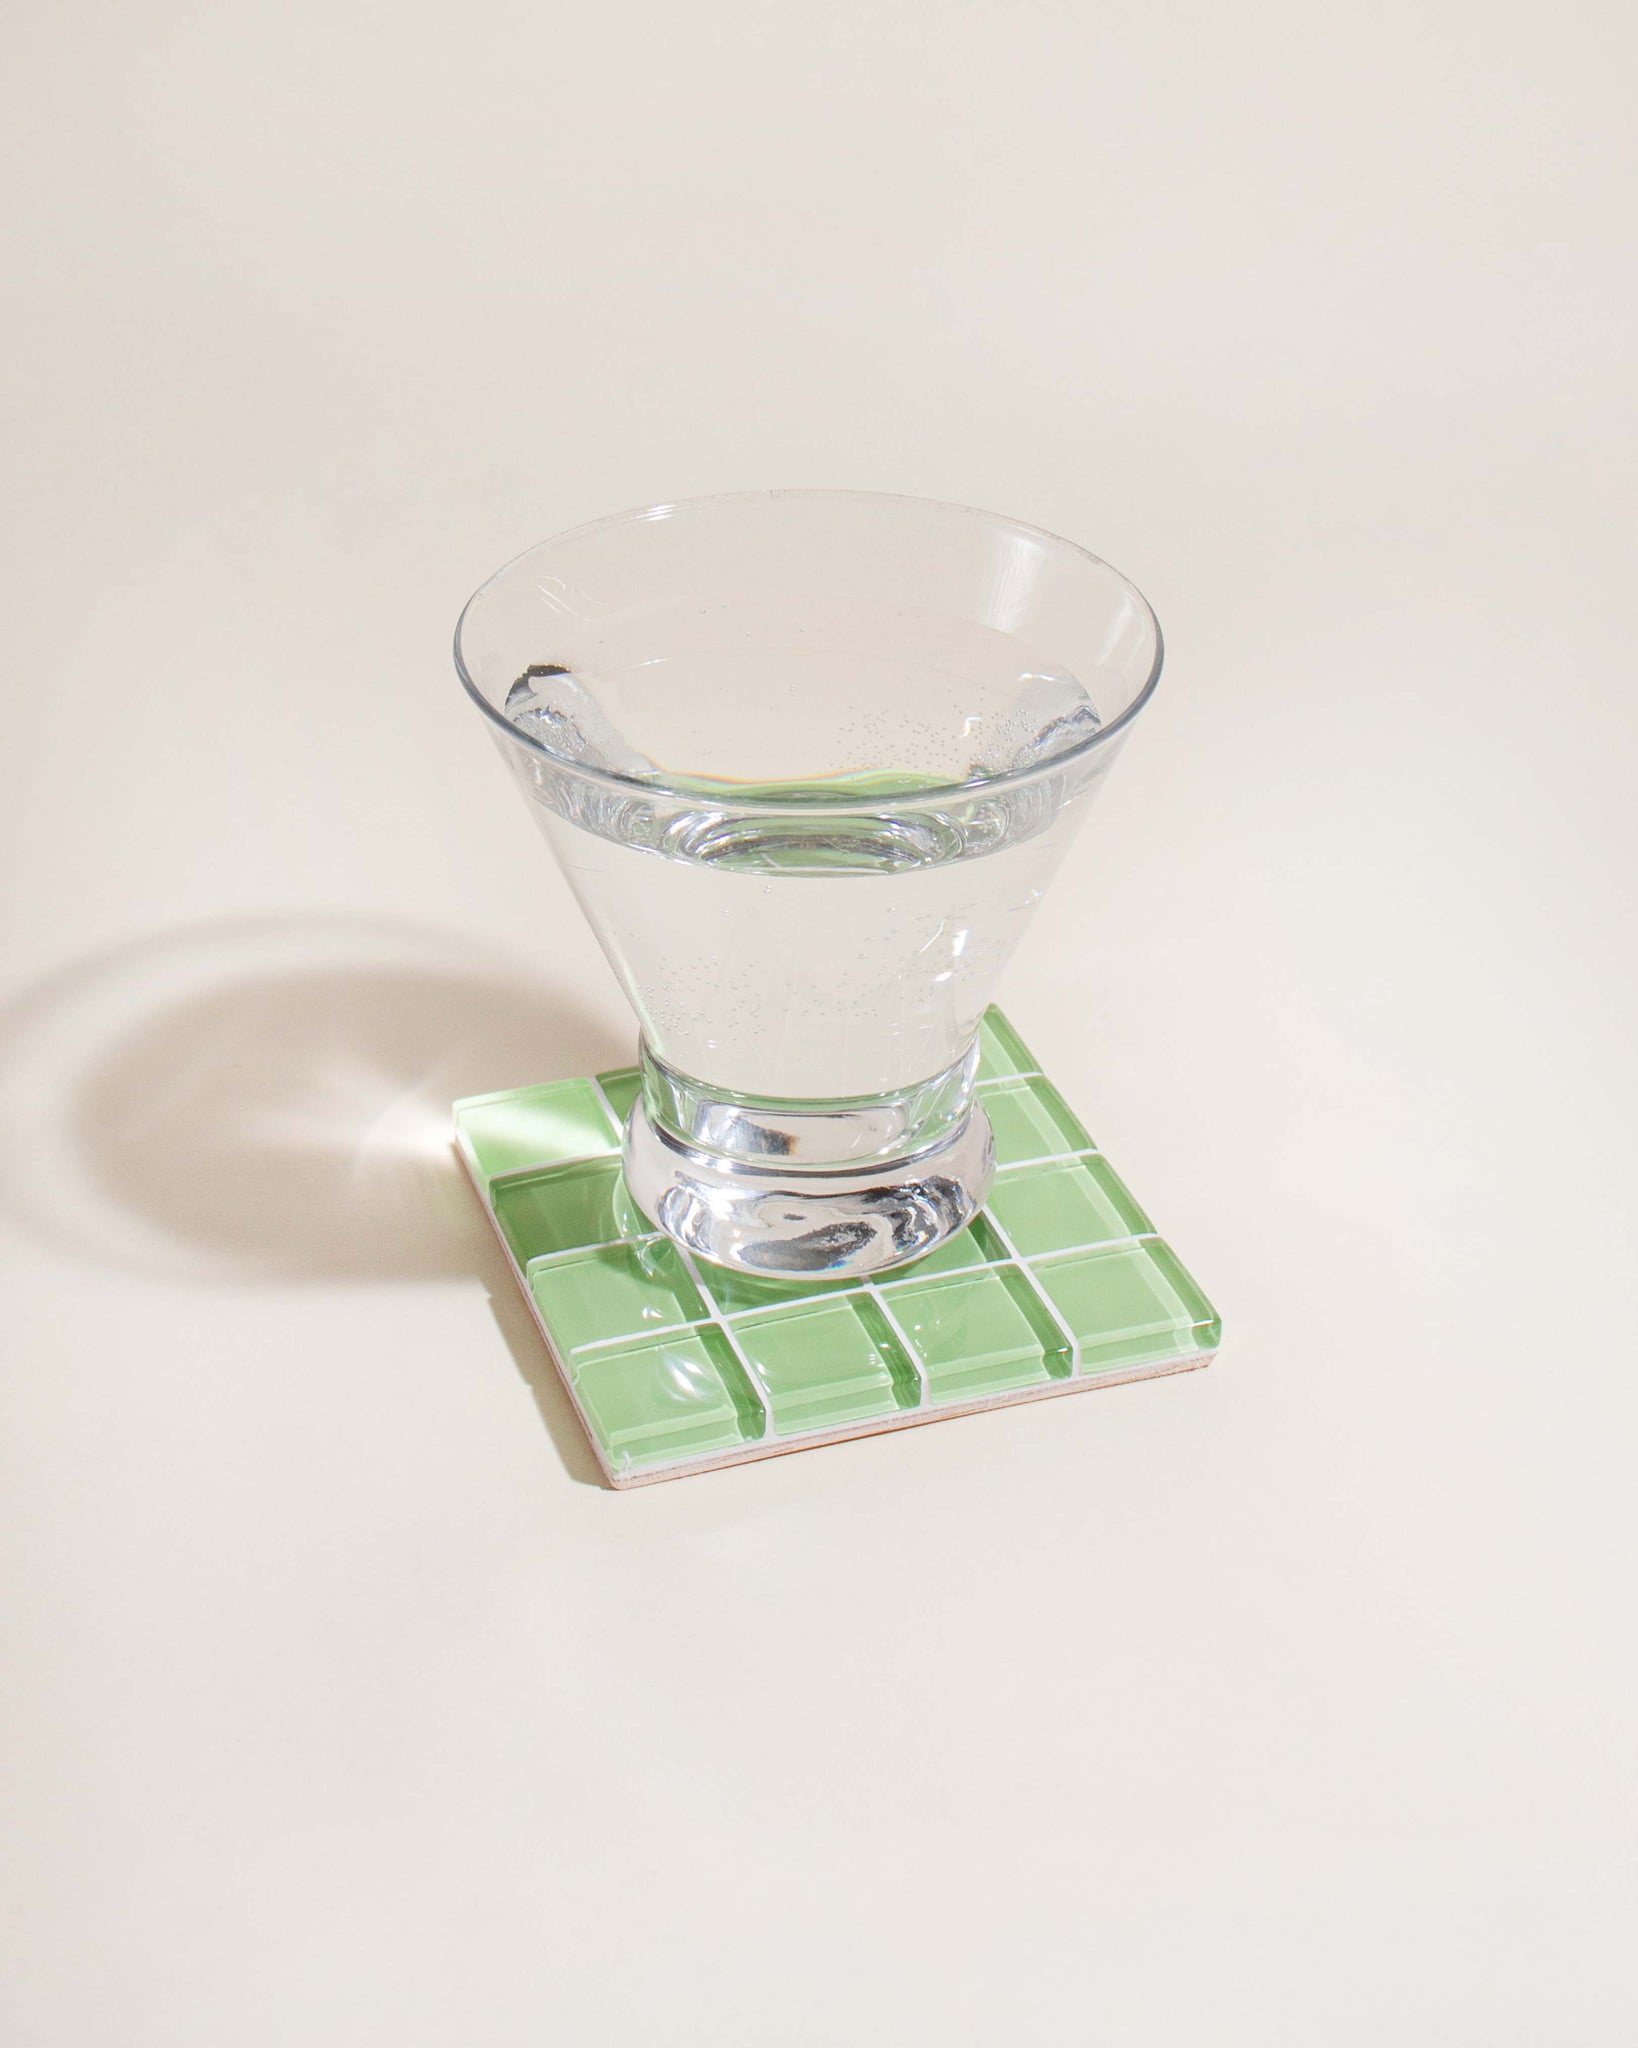 GLASS TILE COASTER - It's Lime